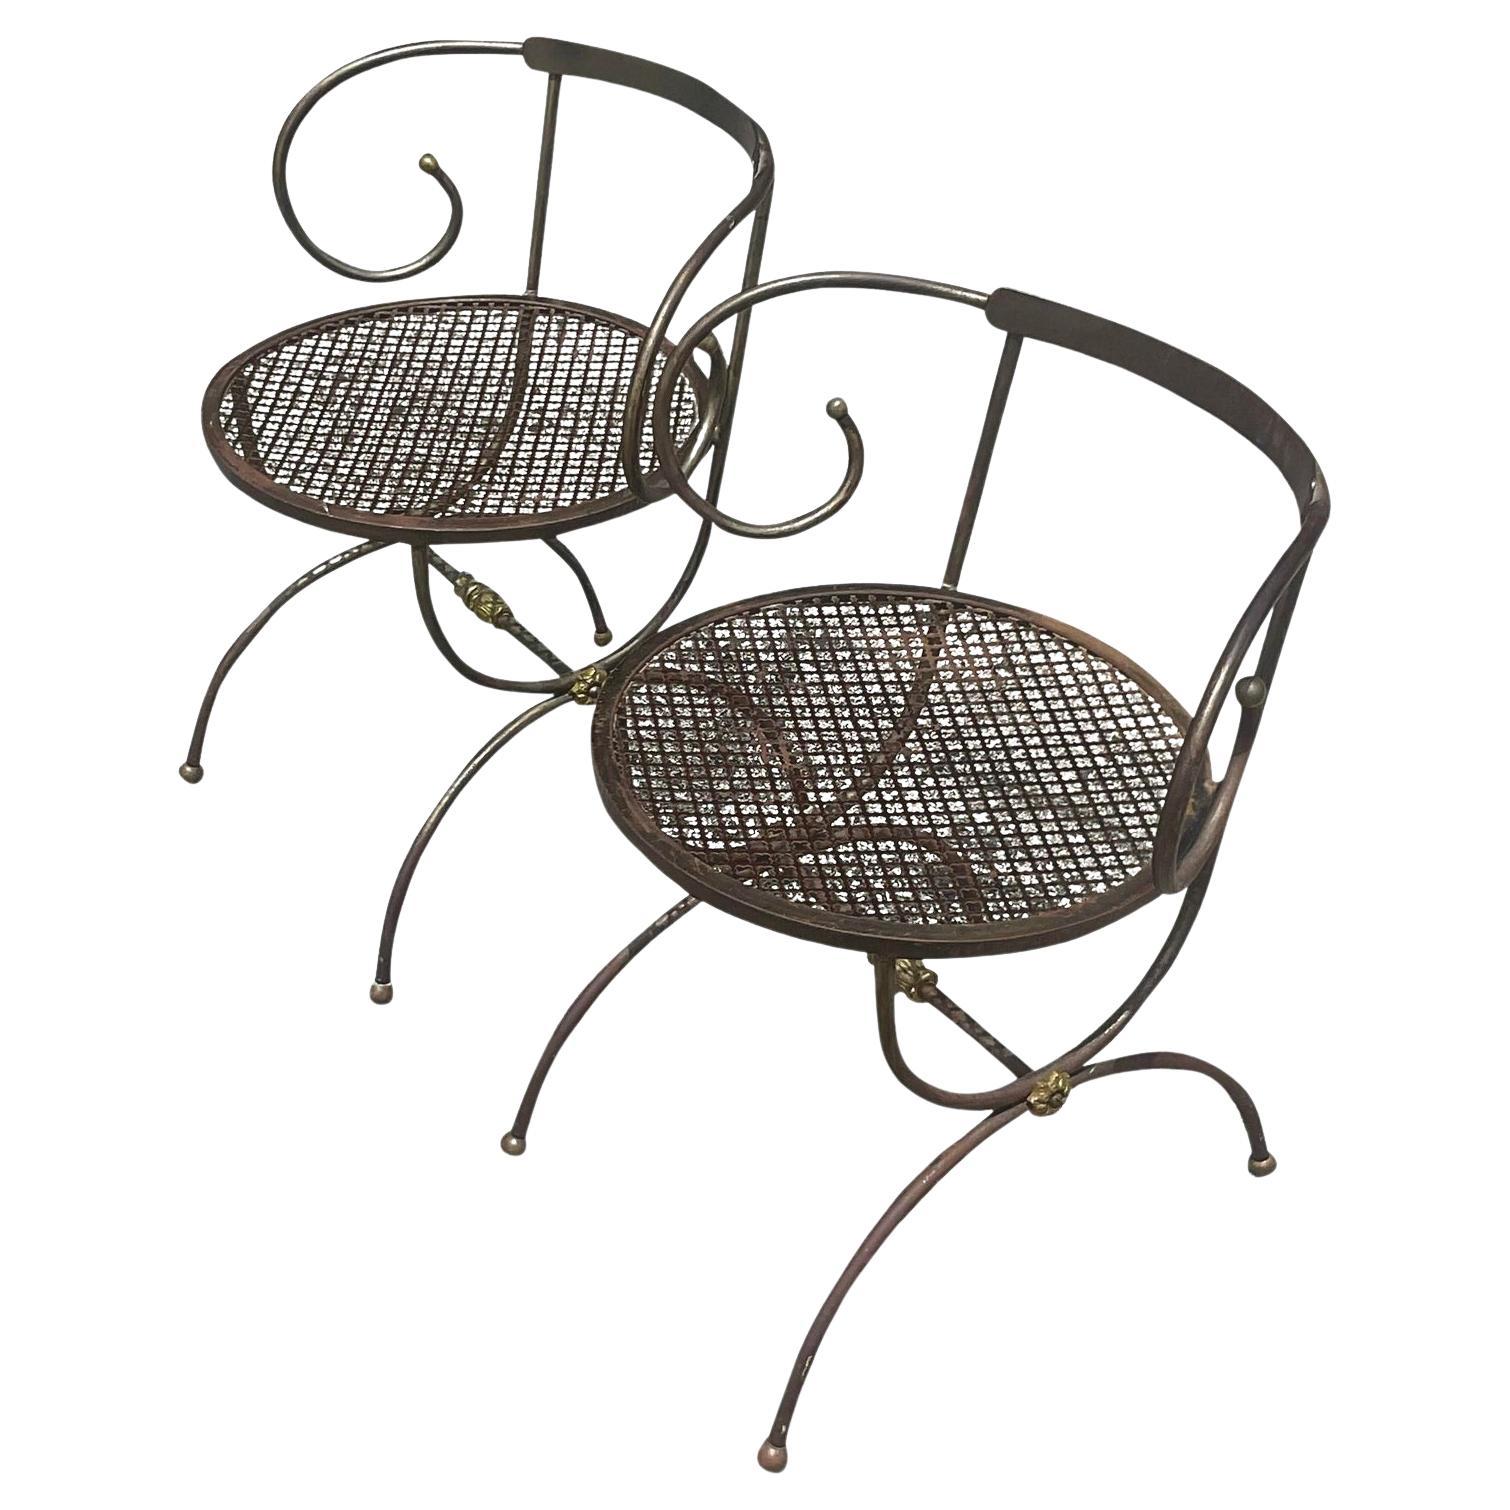 Vintage Boho Swirl Wrought Iron Accent Chairs - a Pair For Sale